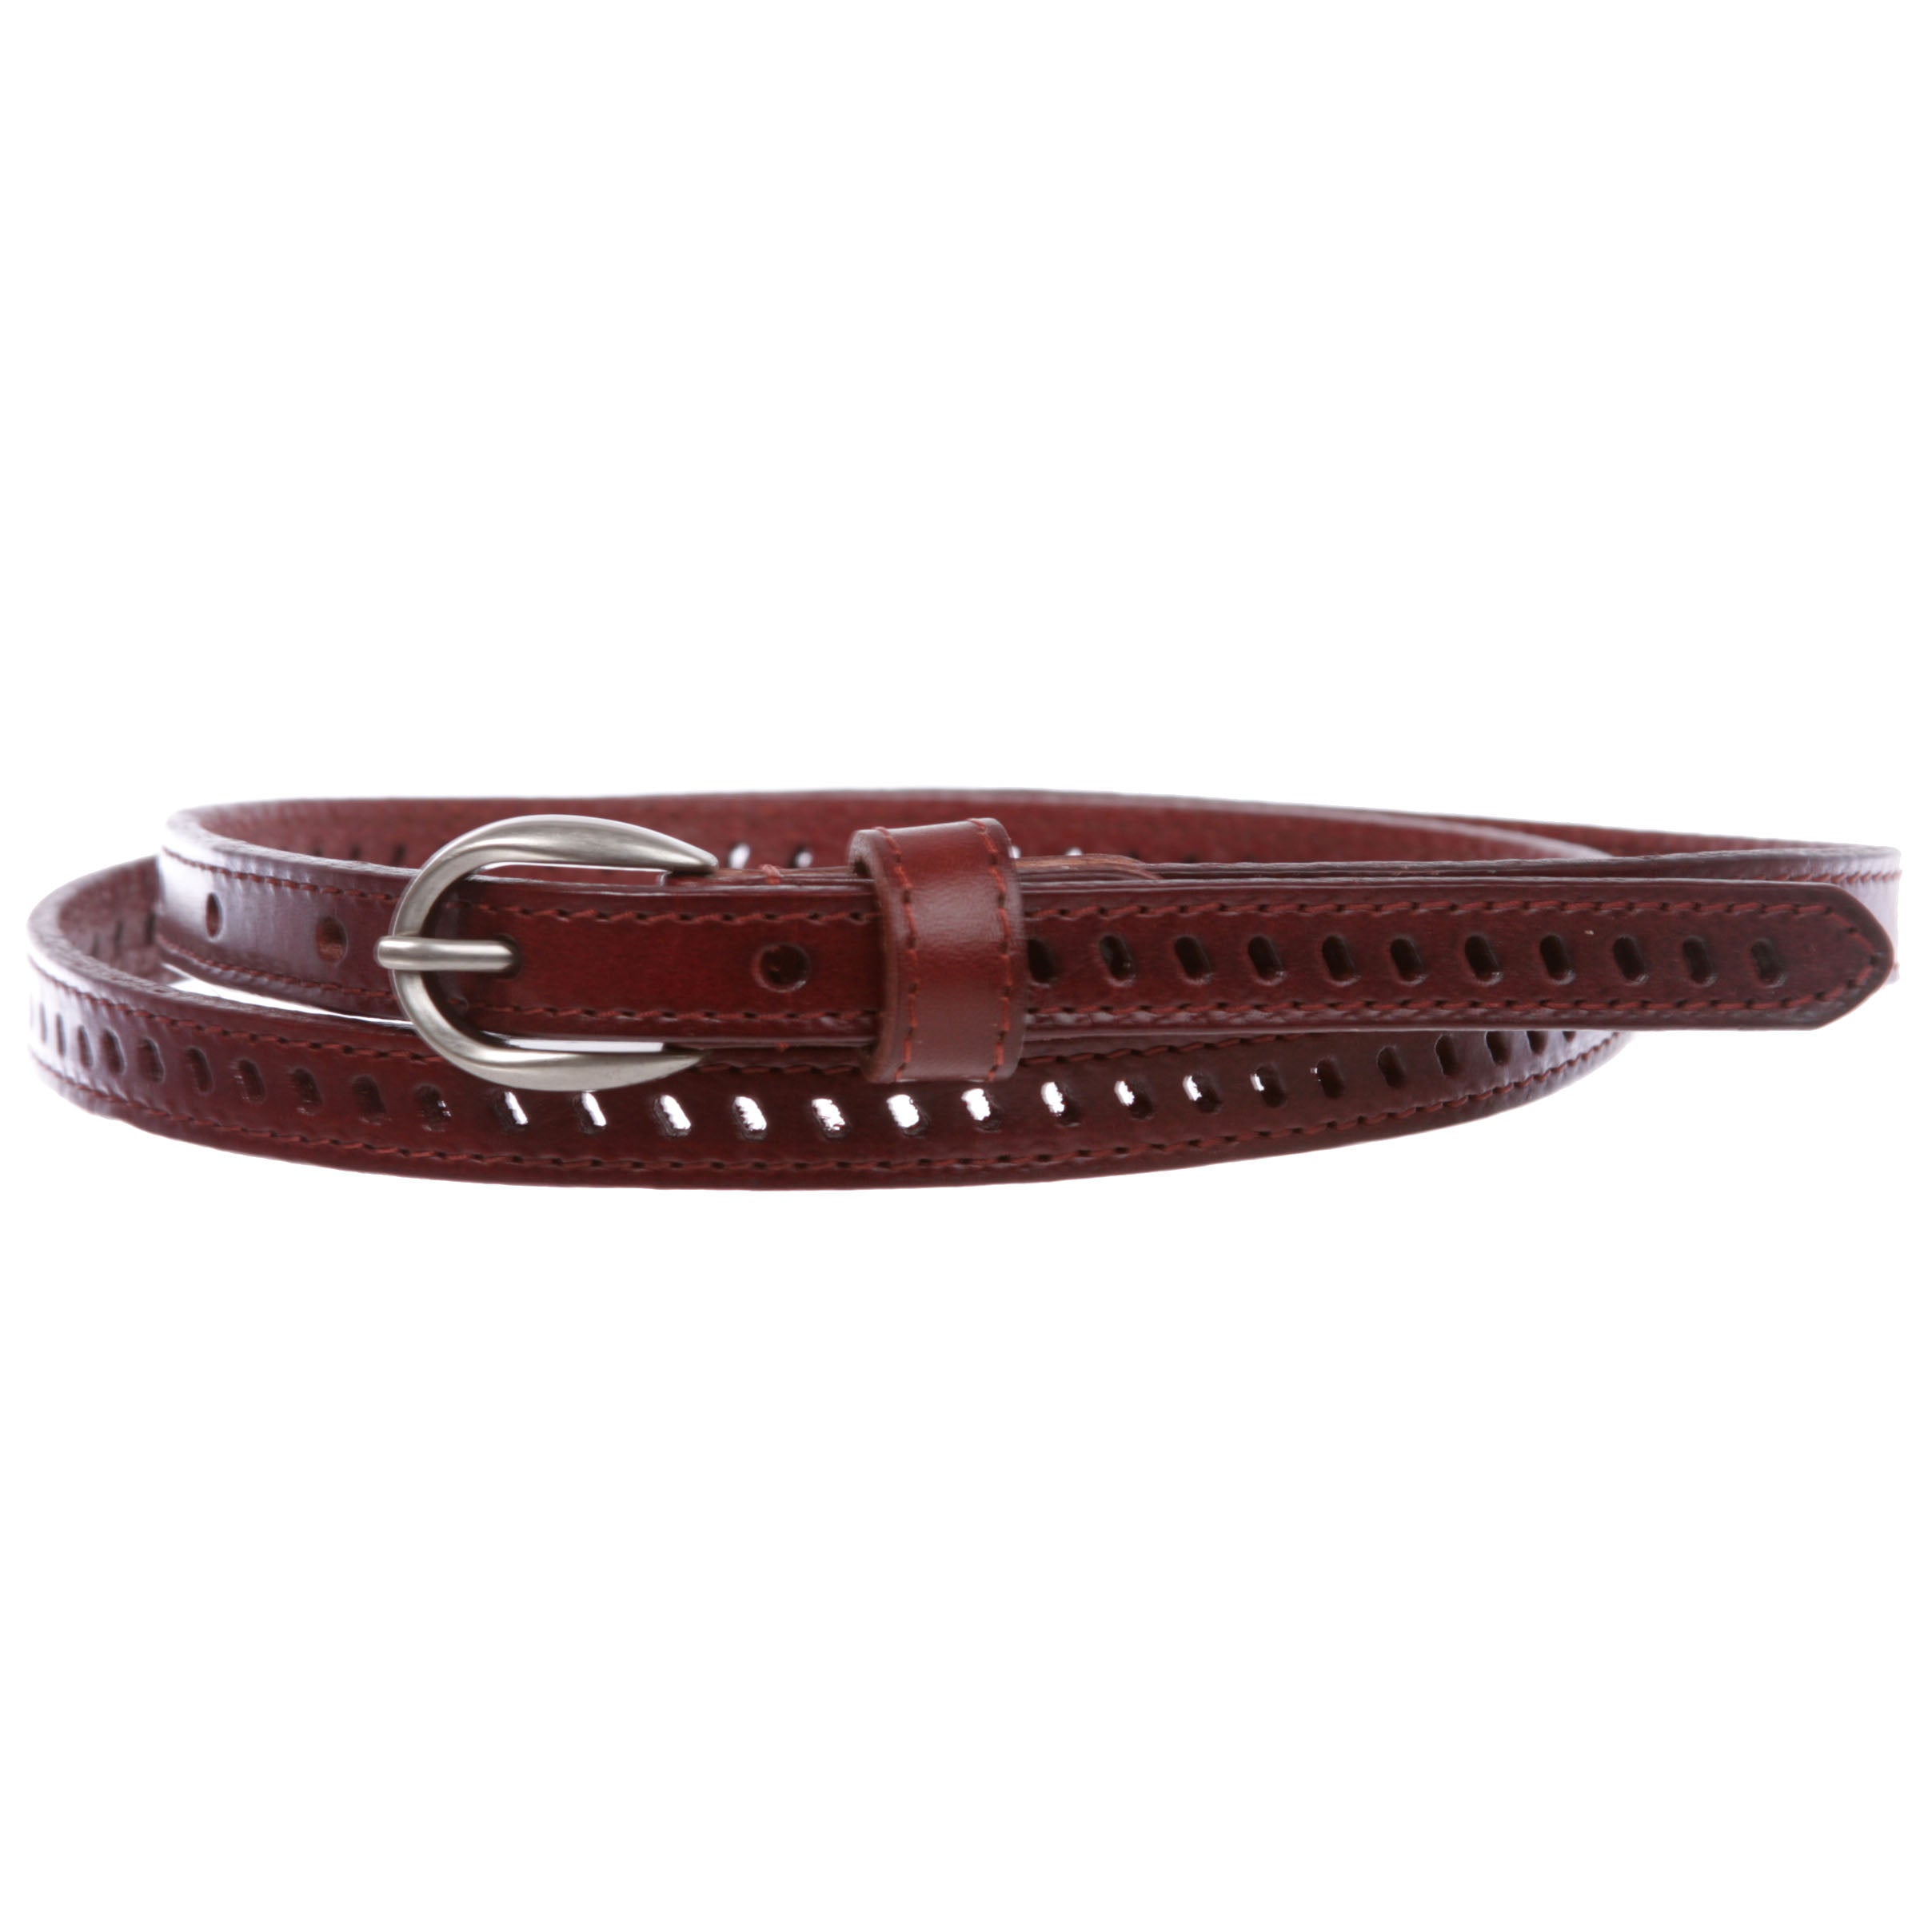 Women's 1/2" (13 mm) Skinny Perforated Edge Stitch Casual / Dress Leather Belt